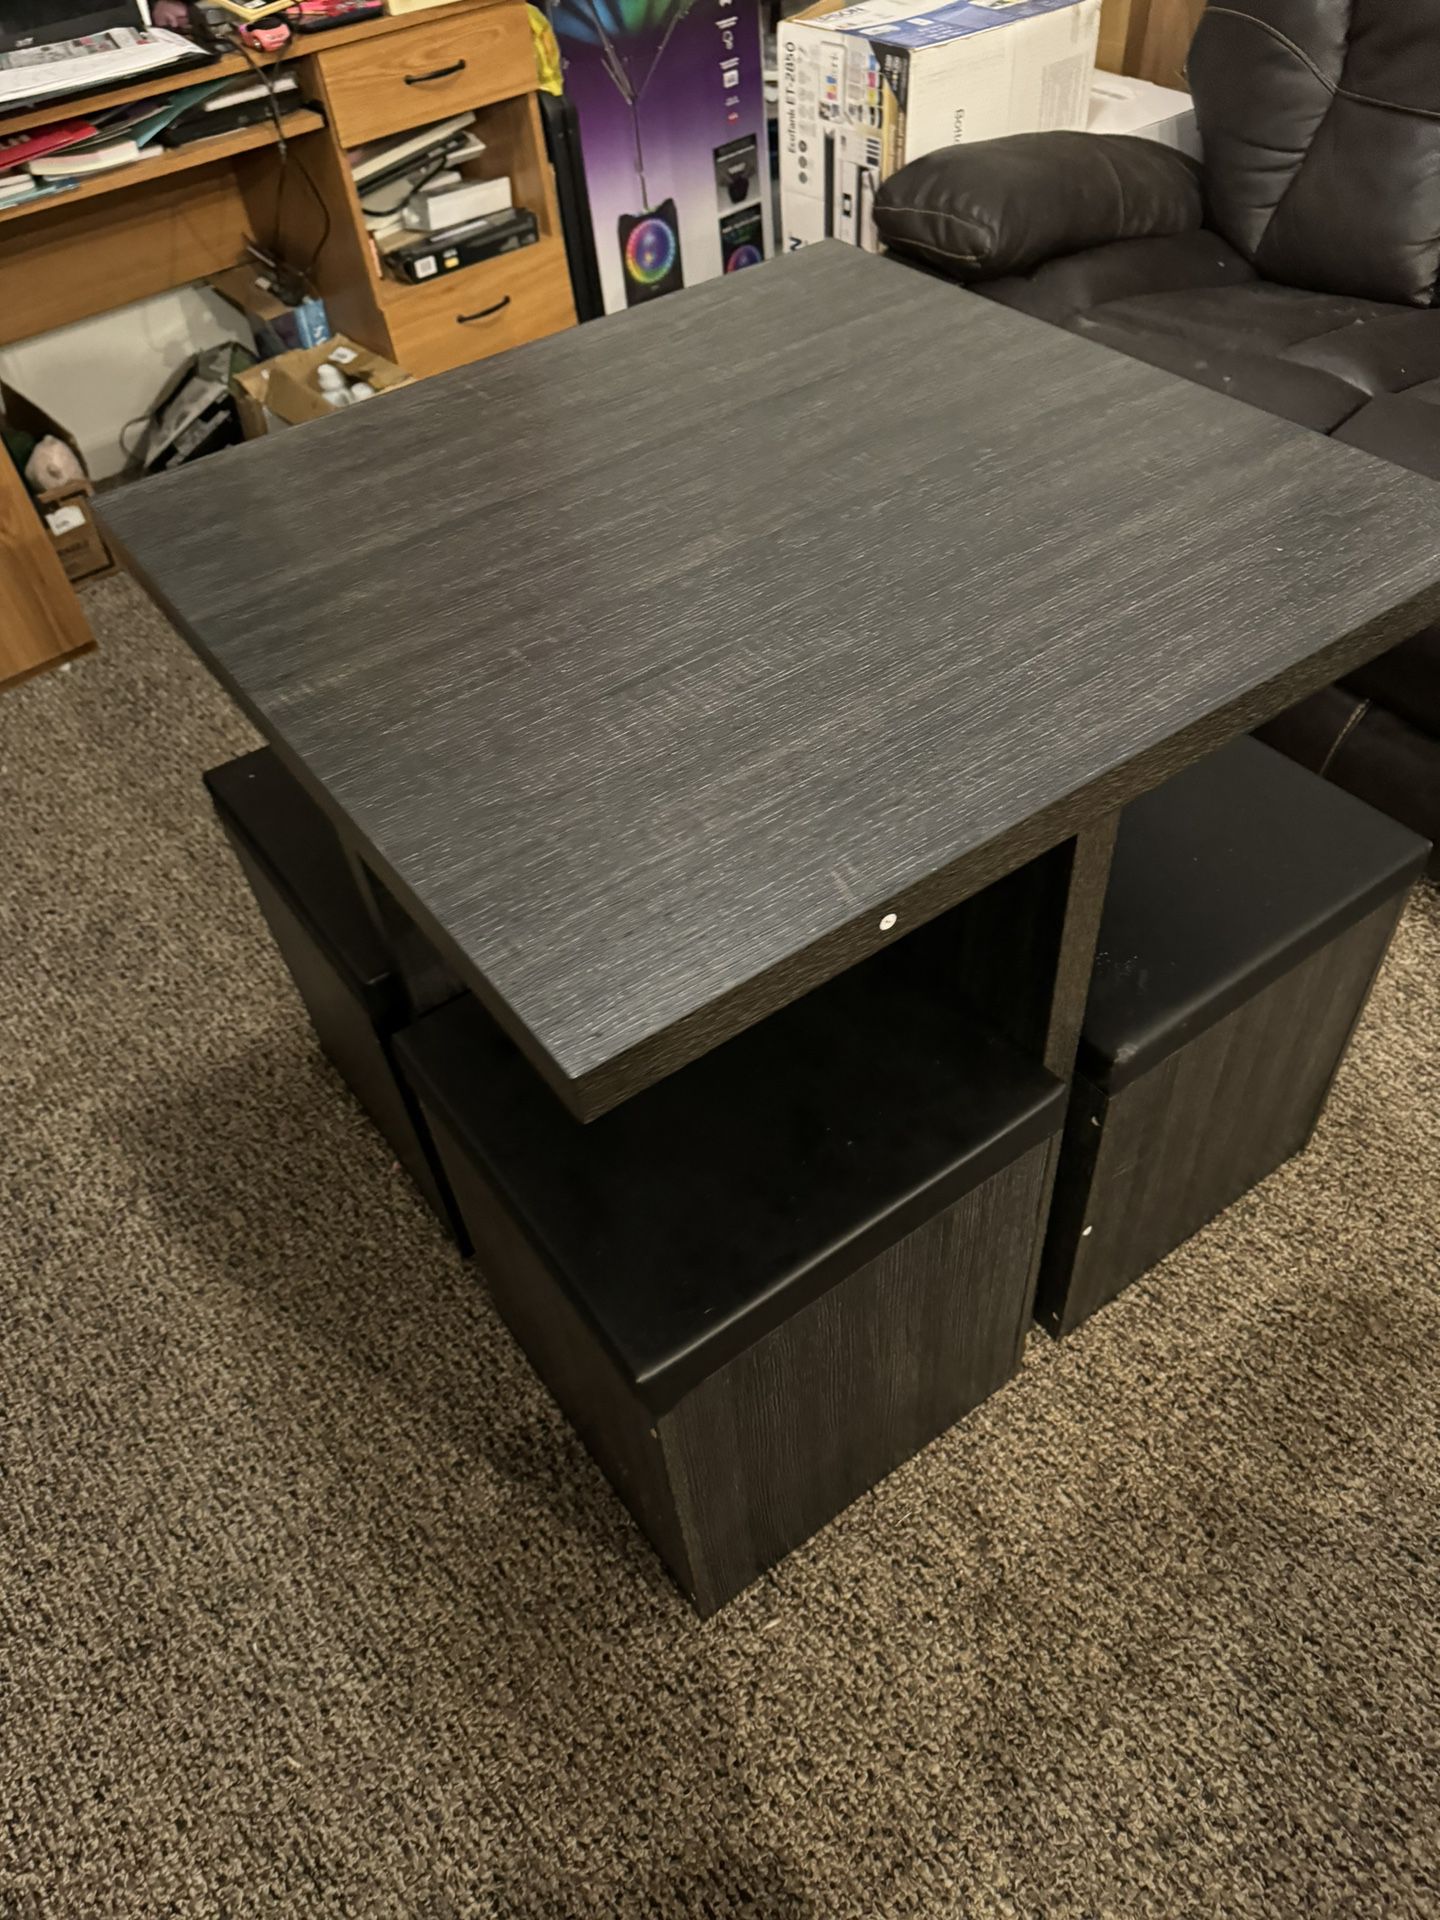 Wooden Table With Storage Box